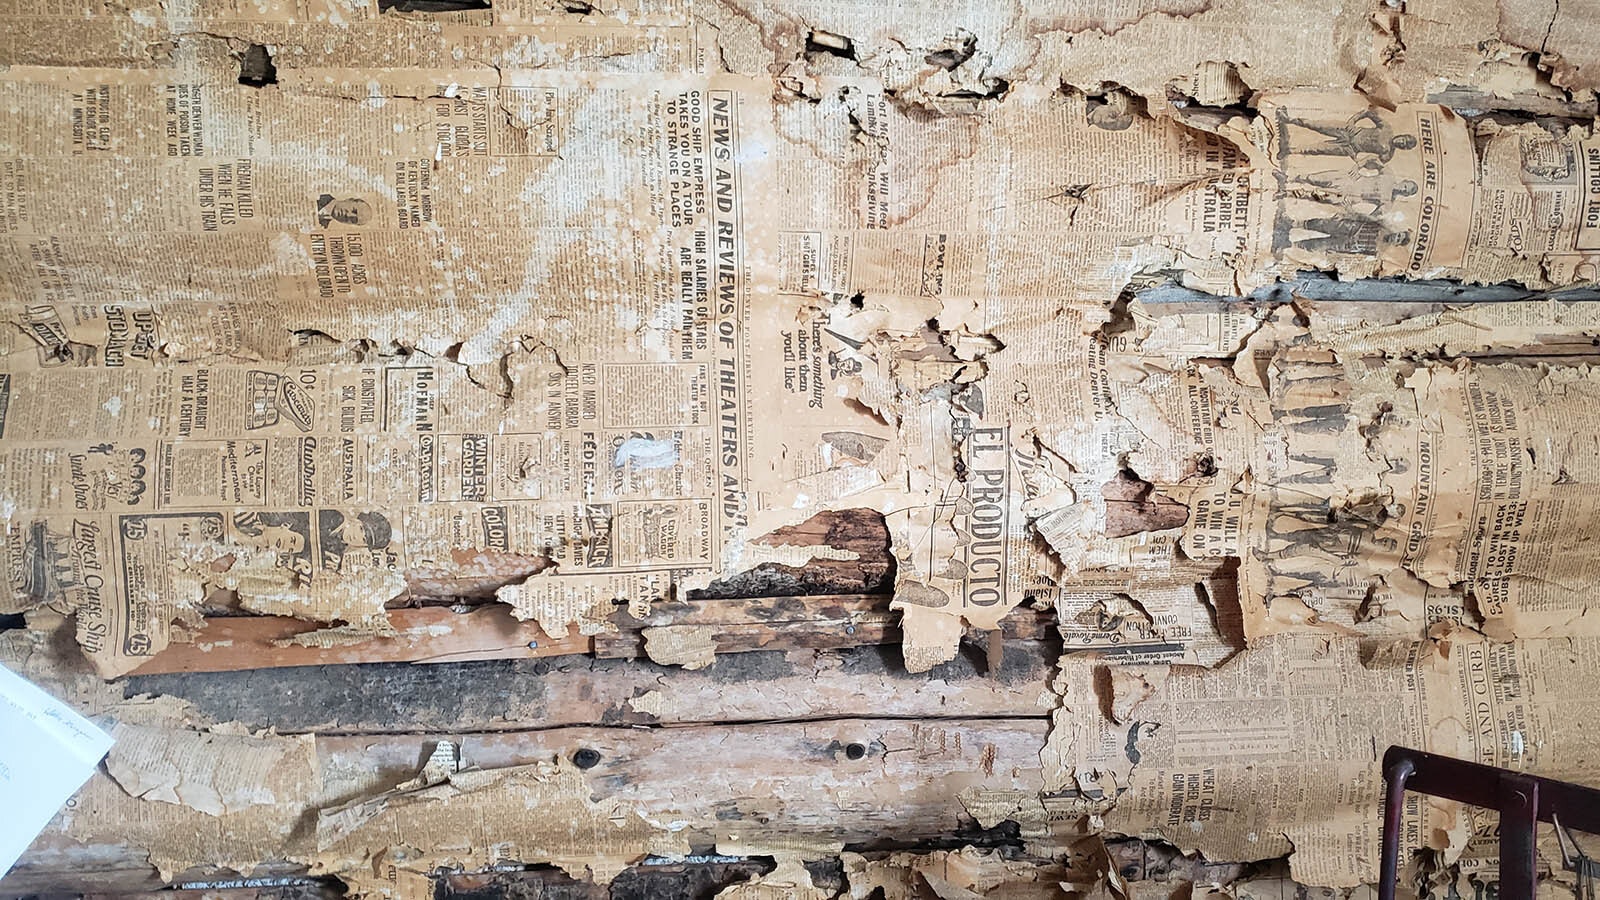 Newsprint was plastered to the interior walls of this mansion-like cabin on display at the Little Snake River Museum in Savery. Sometimes the year of the newspaper is visible along with interesting stories and advertisements.